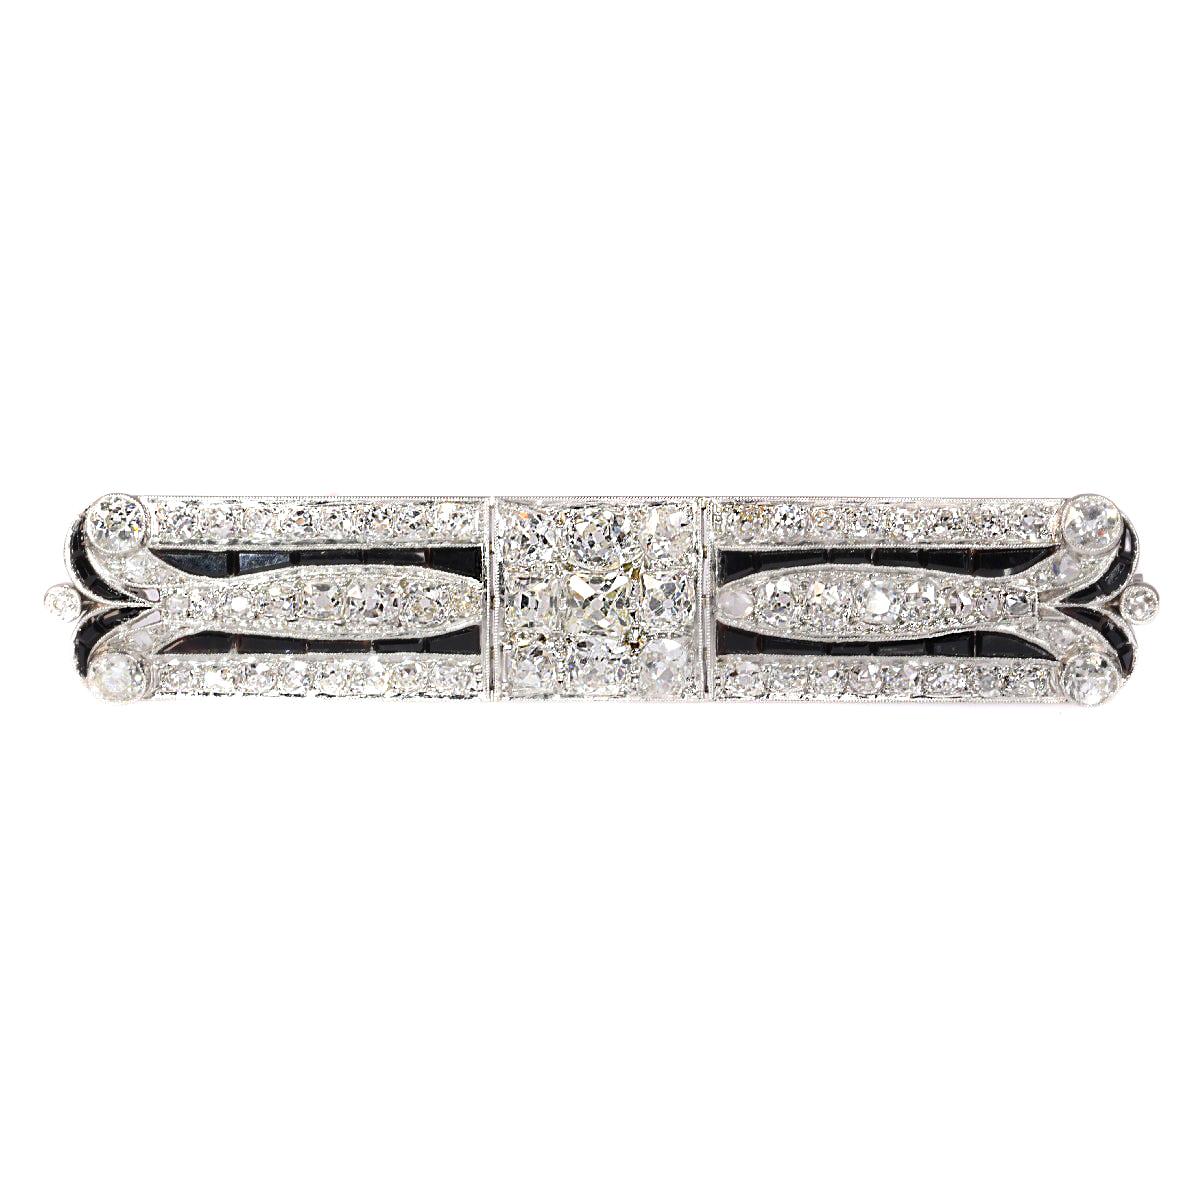 Diamond Loaded Strong Stylish Platinum Art Deco Brooch with over 7 crts Diamonds For Sale